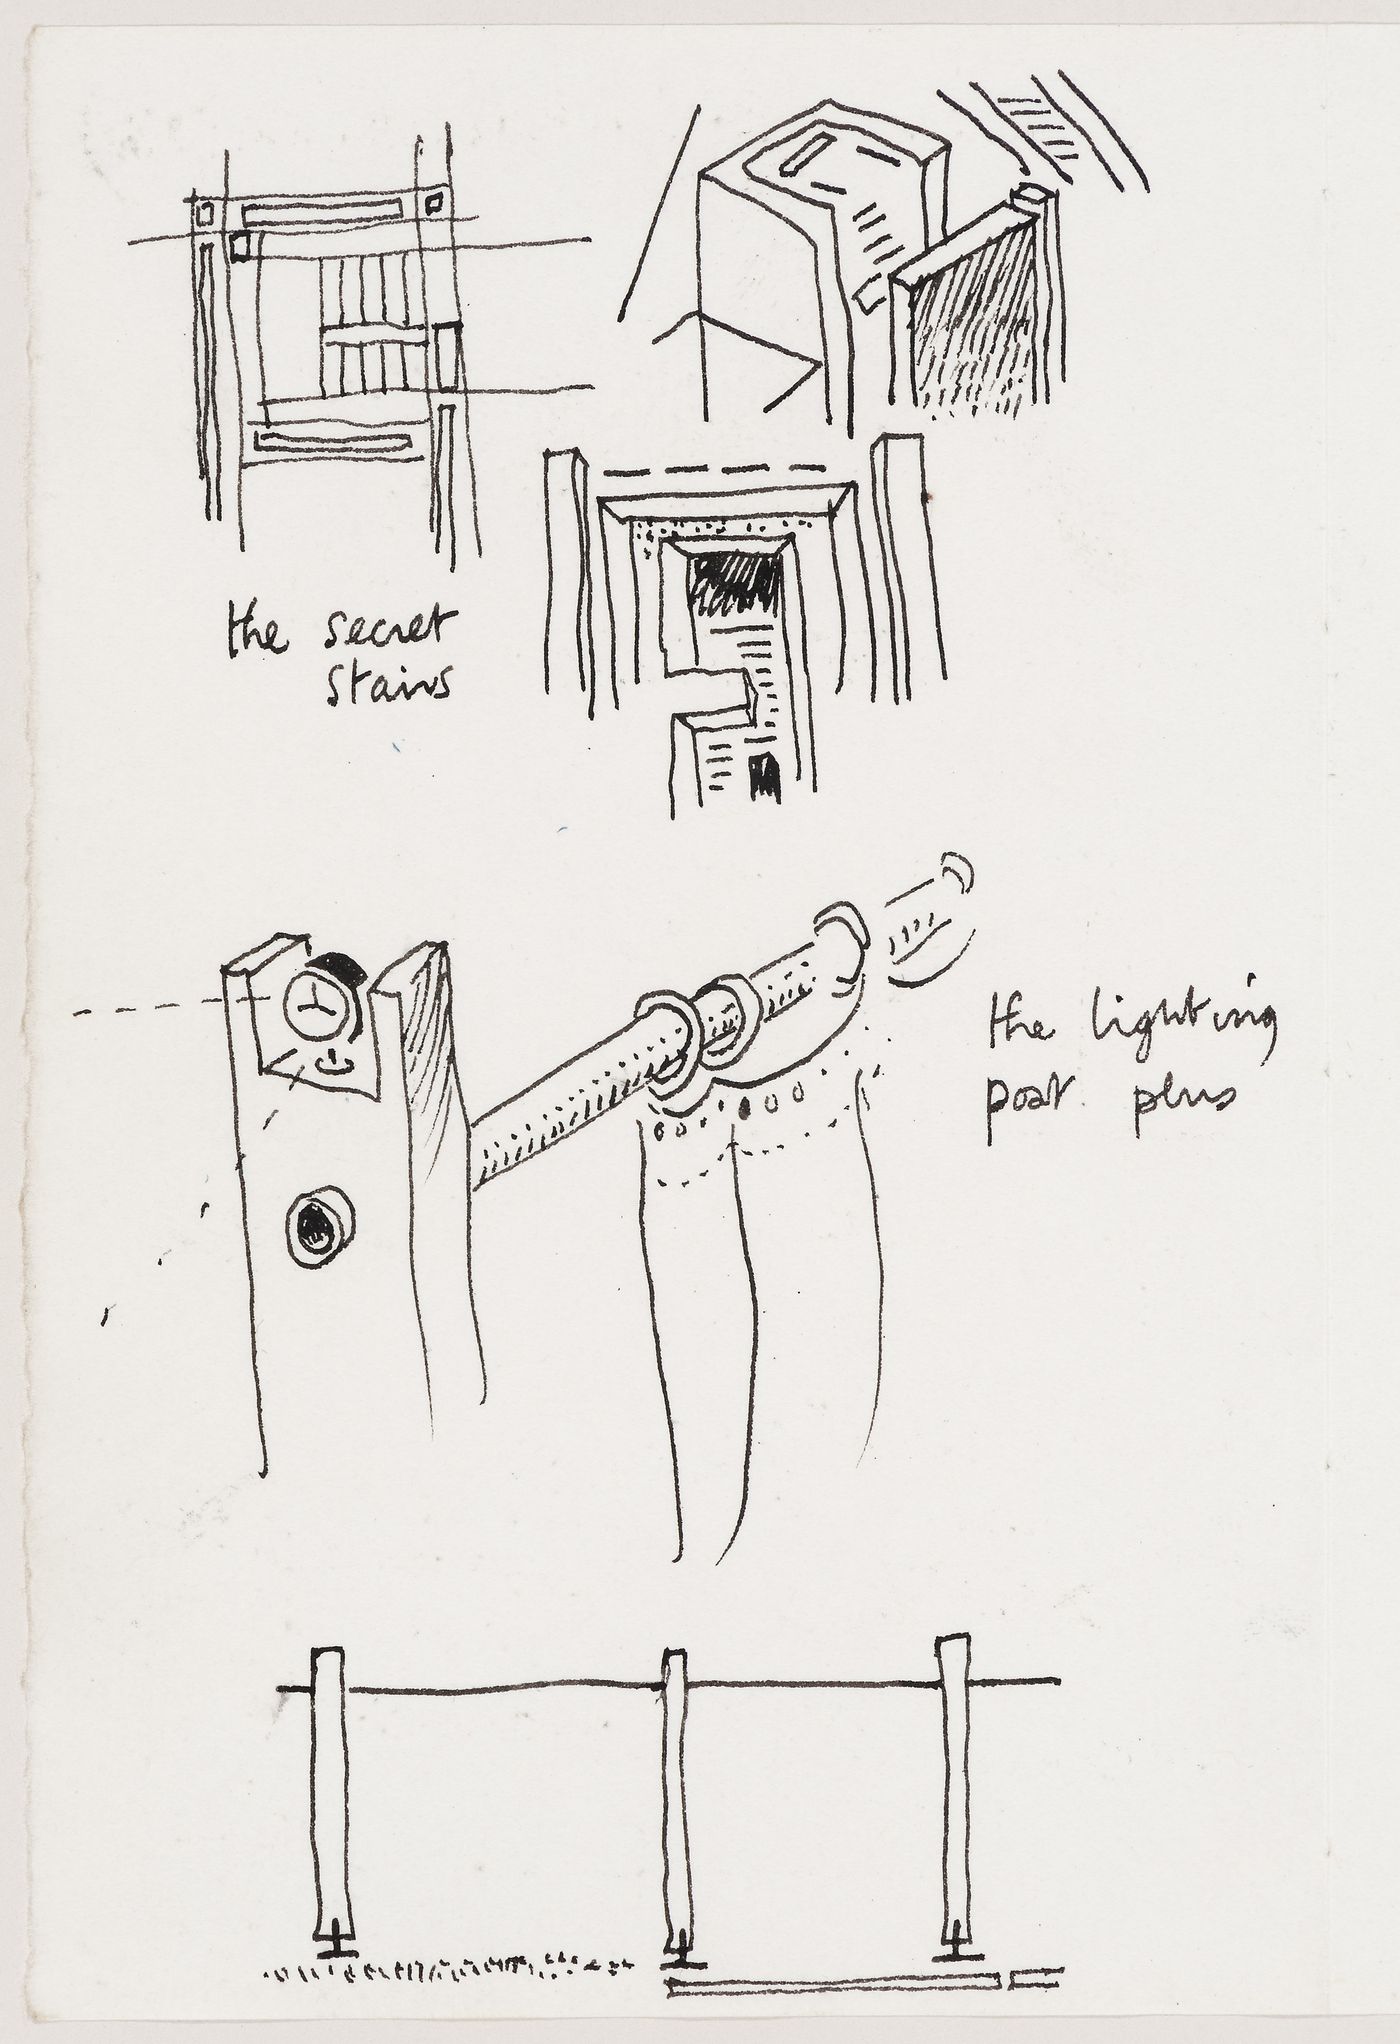 Perthut House: conceptual sketches of details ("the secret stairs", "the lighting post plus")